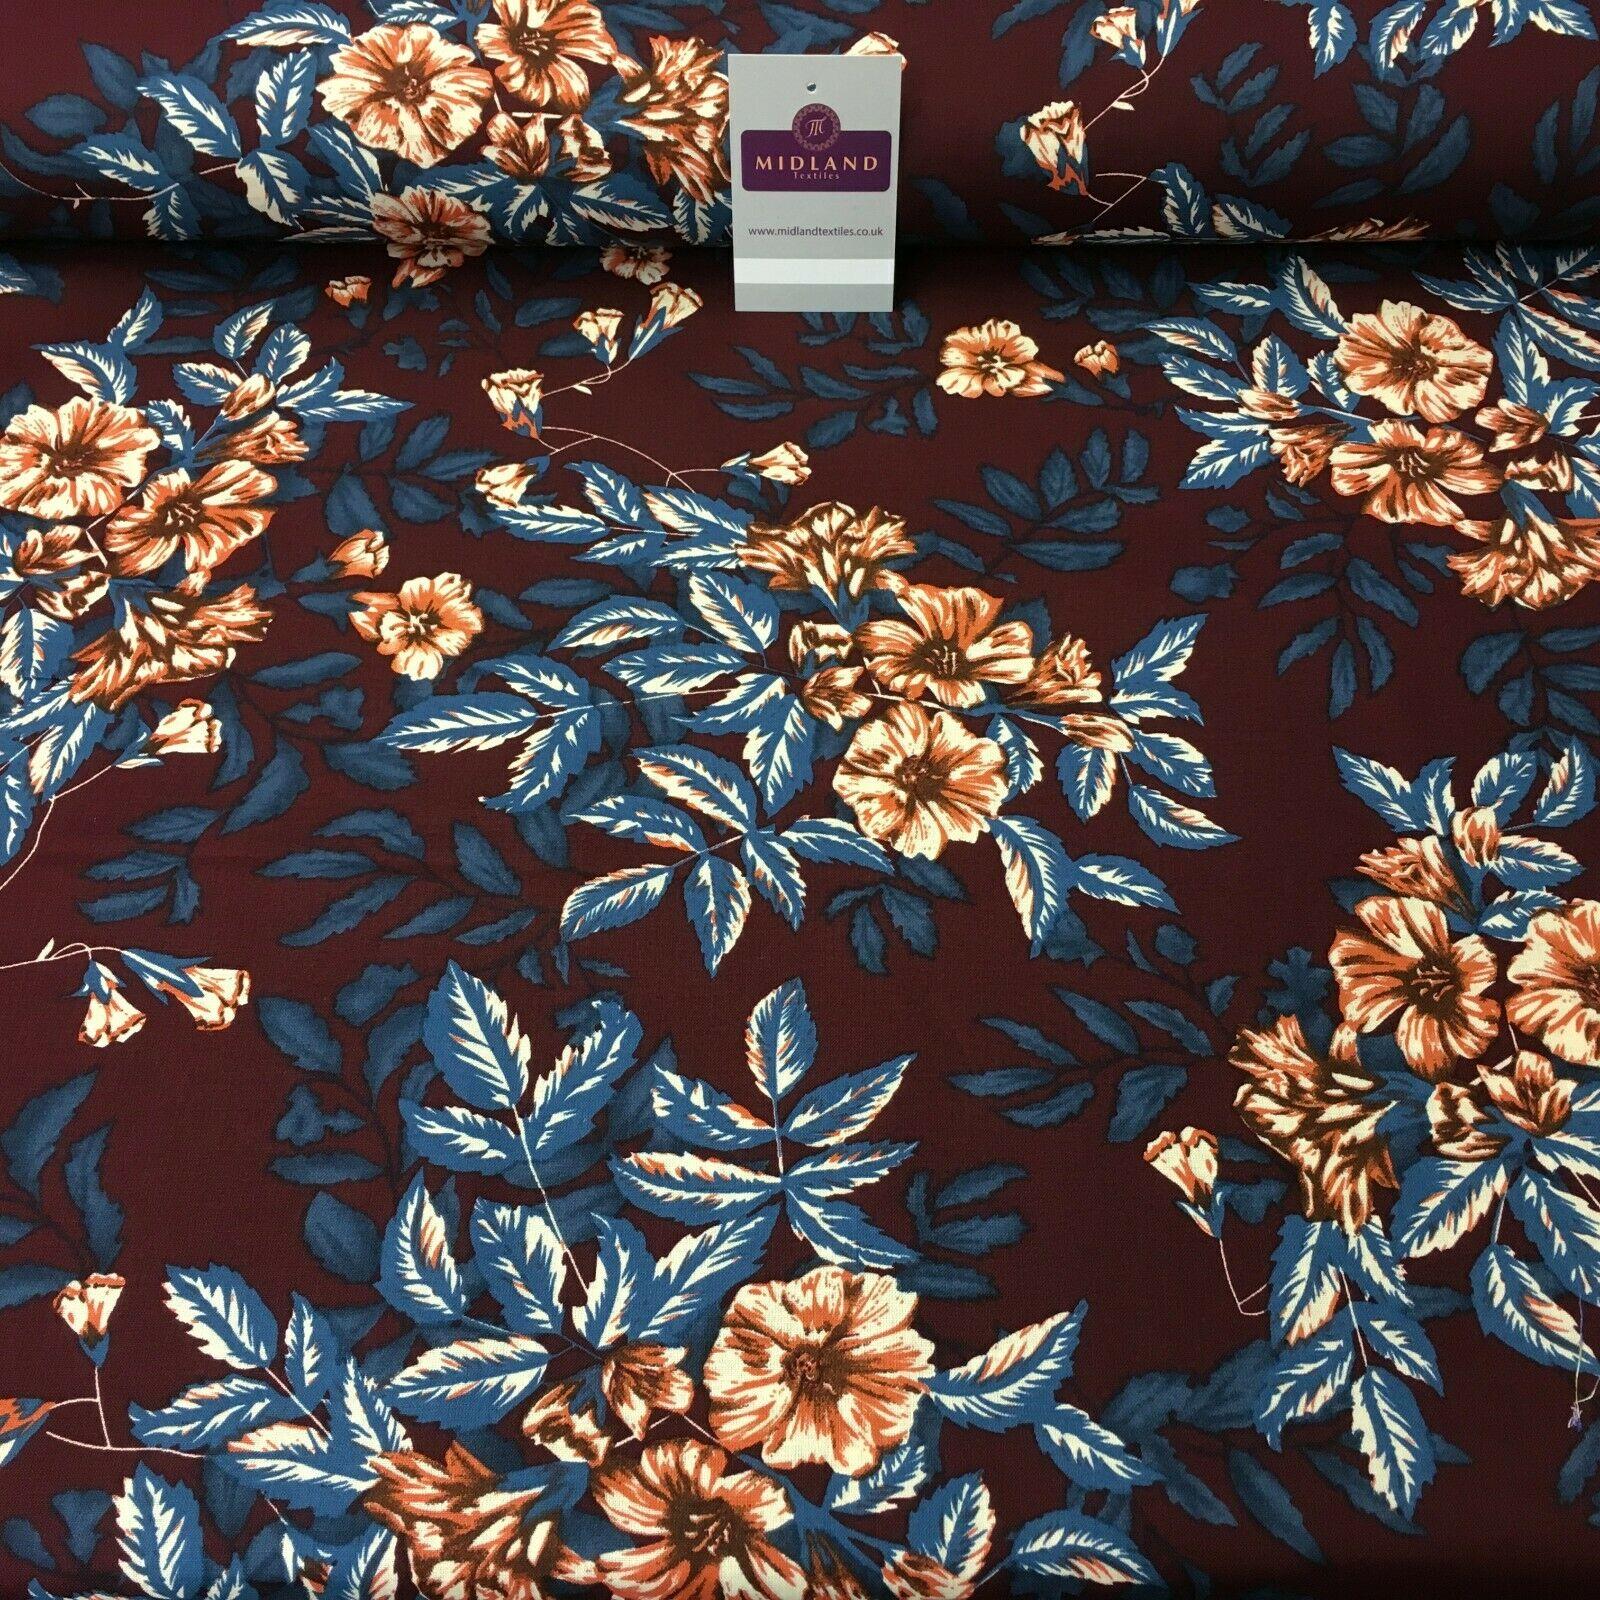 Wine Teal Floral Printed Cotton Linen Dress Fabric 150cm Wide MK1086-9